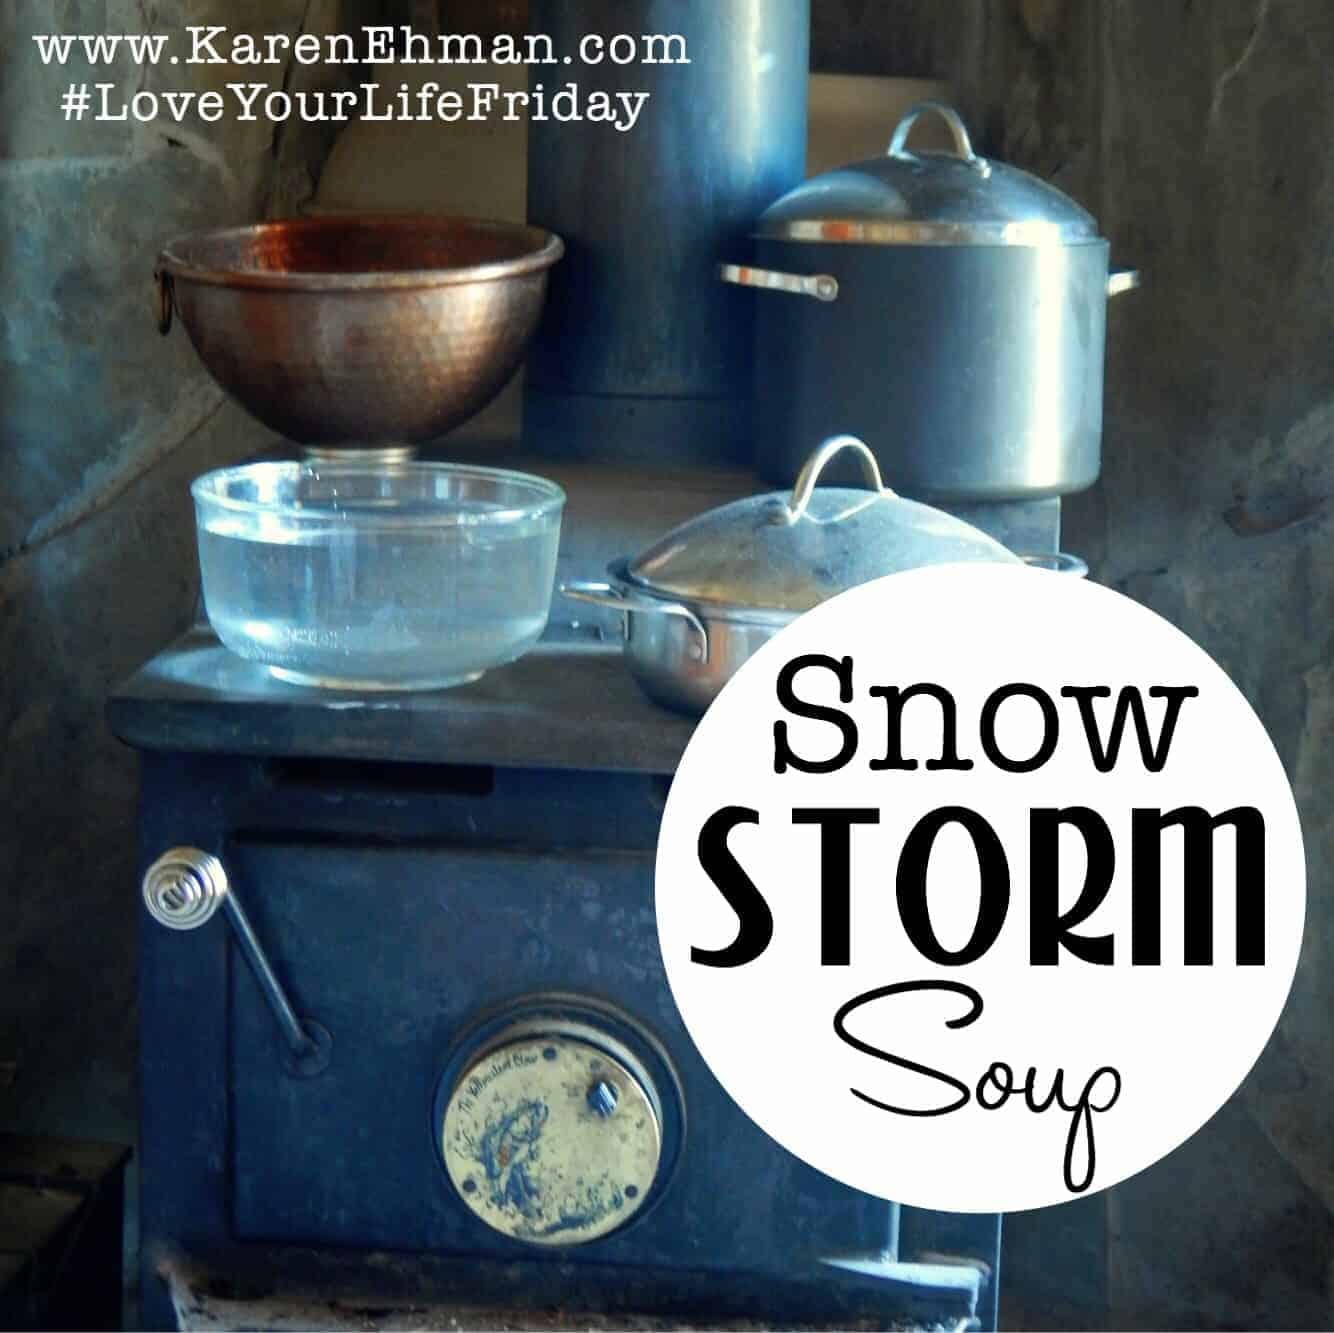 Snow Storm Soup (and lessons learned) for #LoveYourLifeFriday